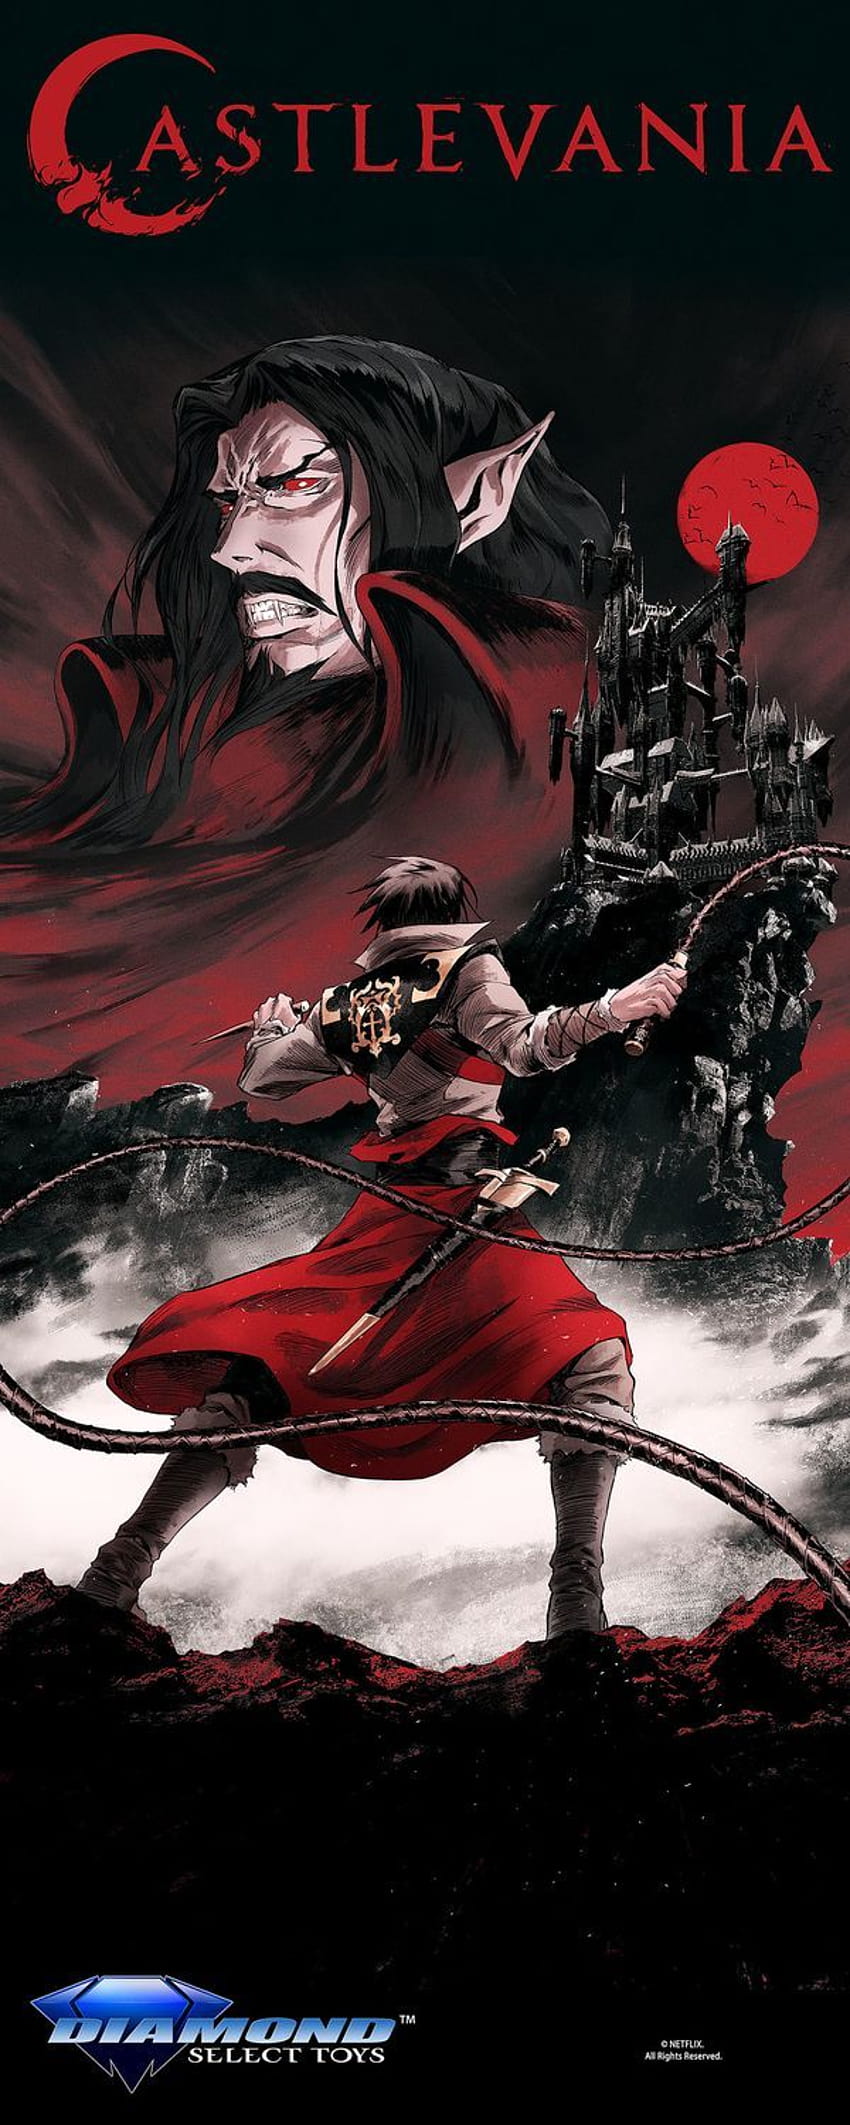 Castlevania TV Series to Receive Collectibles from Diamond Select, castlevania anime HD phone wallpaper